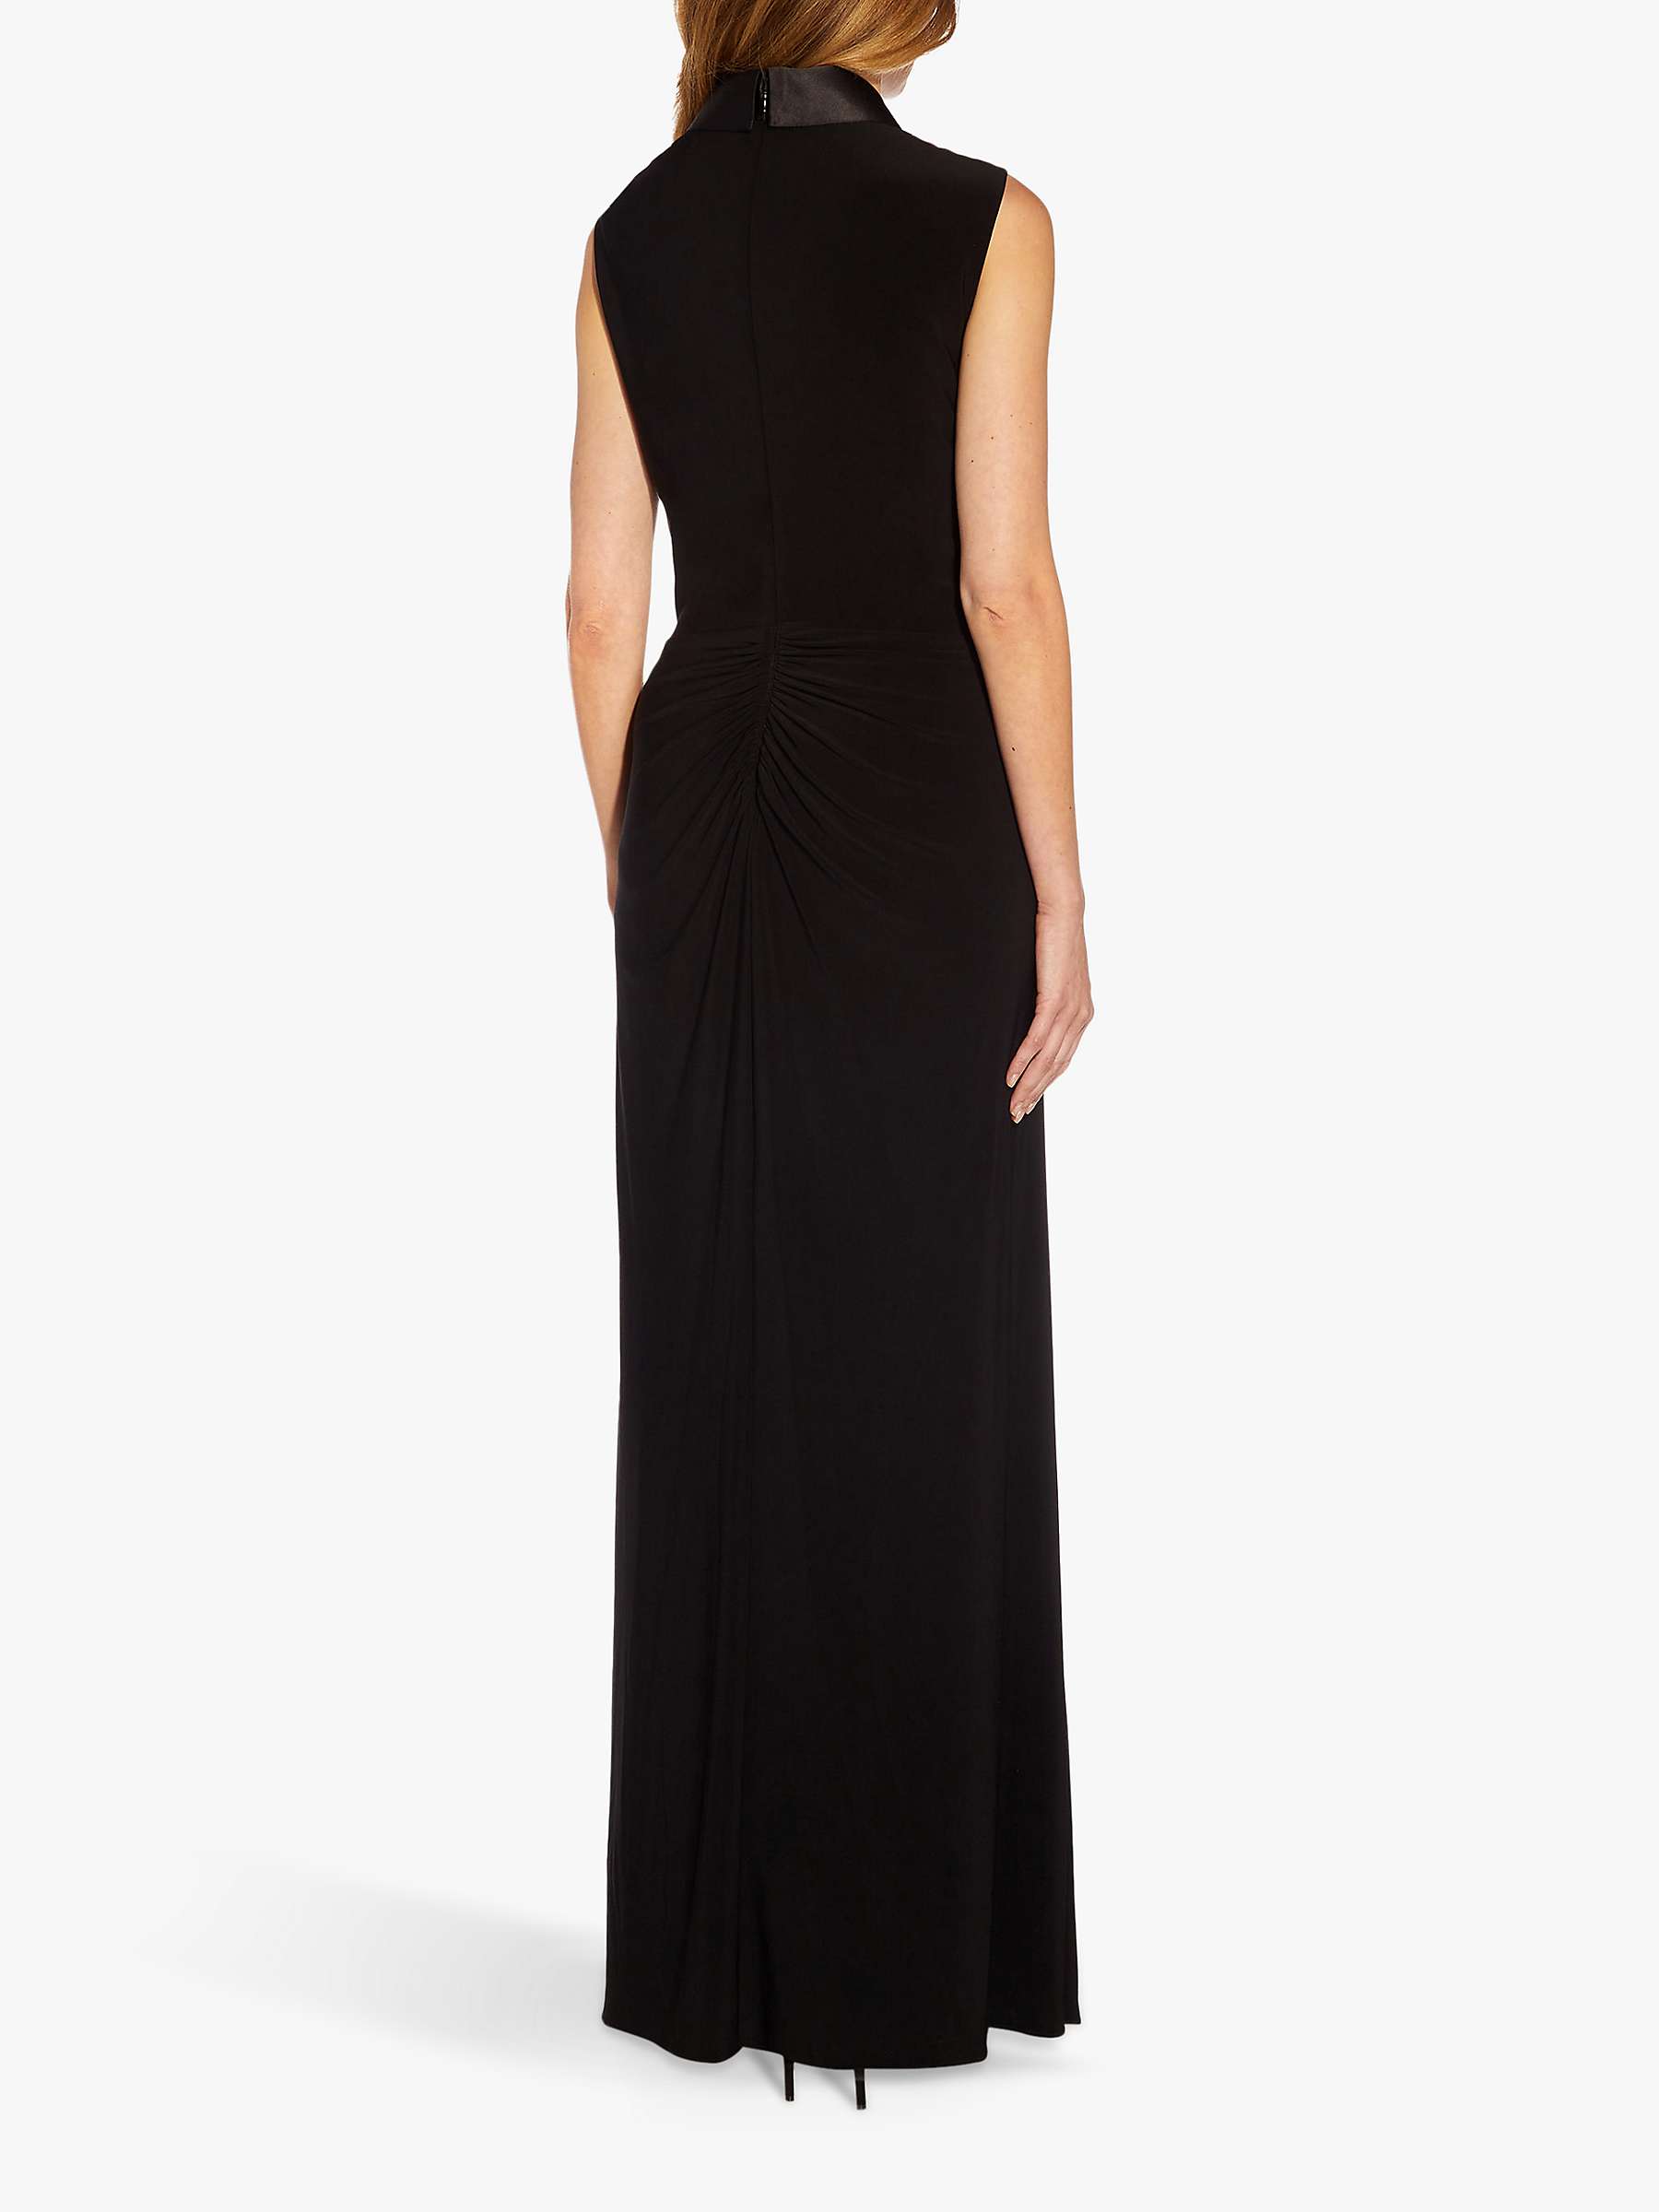 Adrianna Papell Jersey Tuxedo Gown in Black Womens Clothing Dresses Formal dresses and evening gowns 